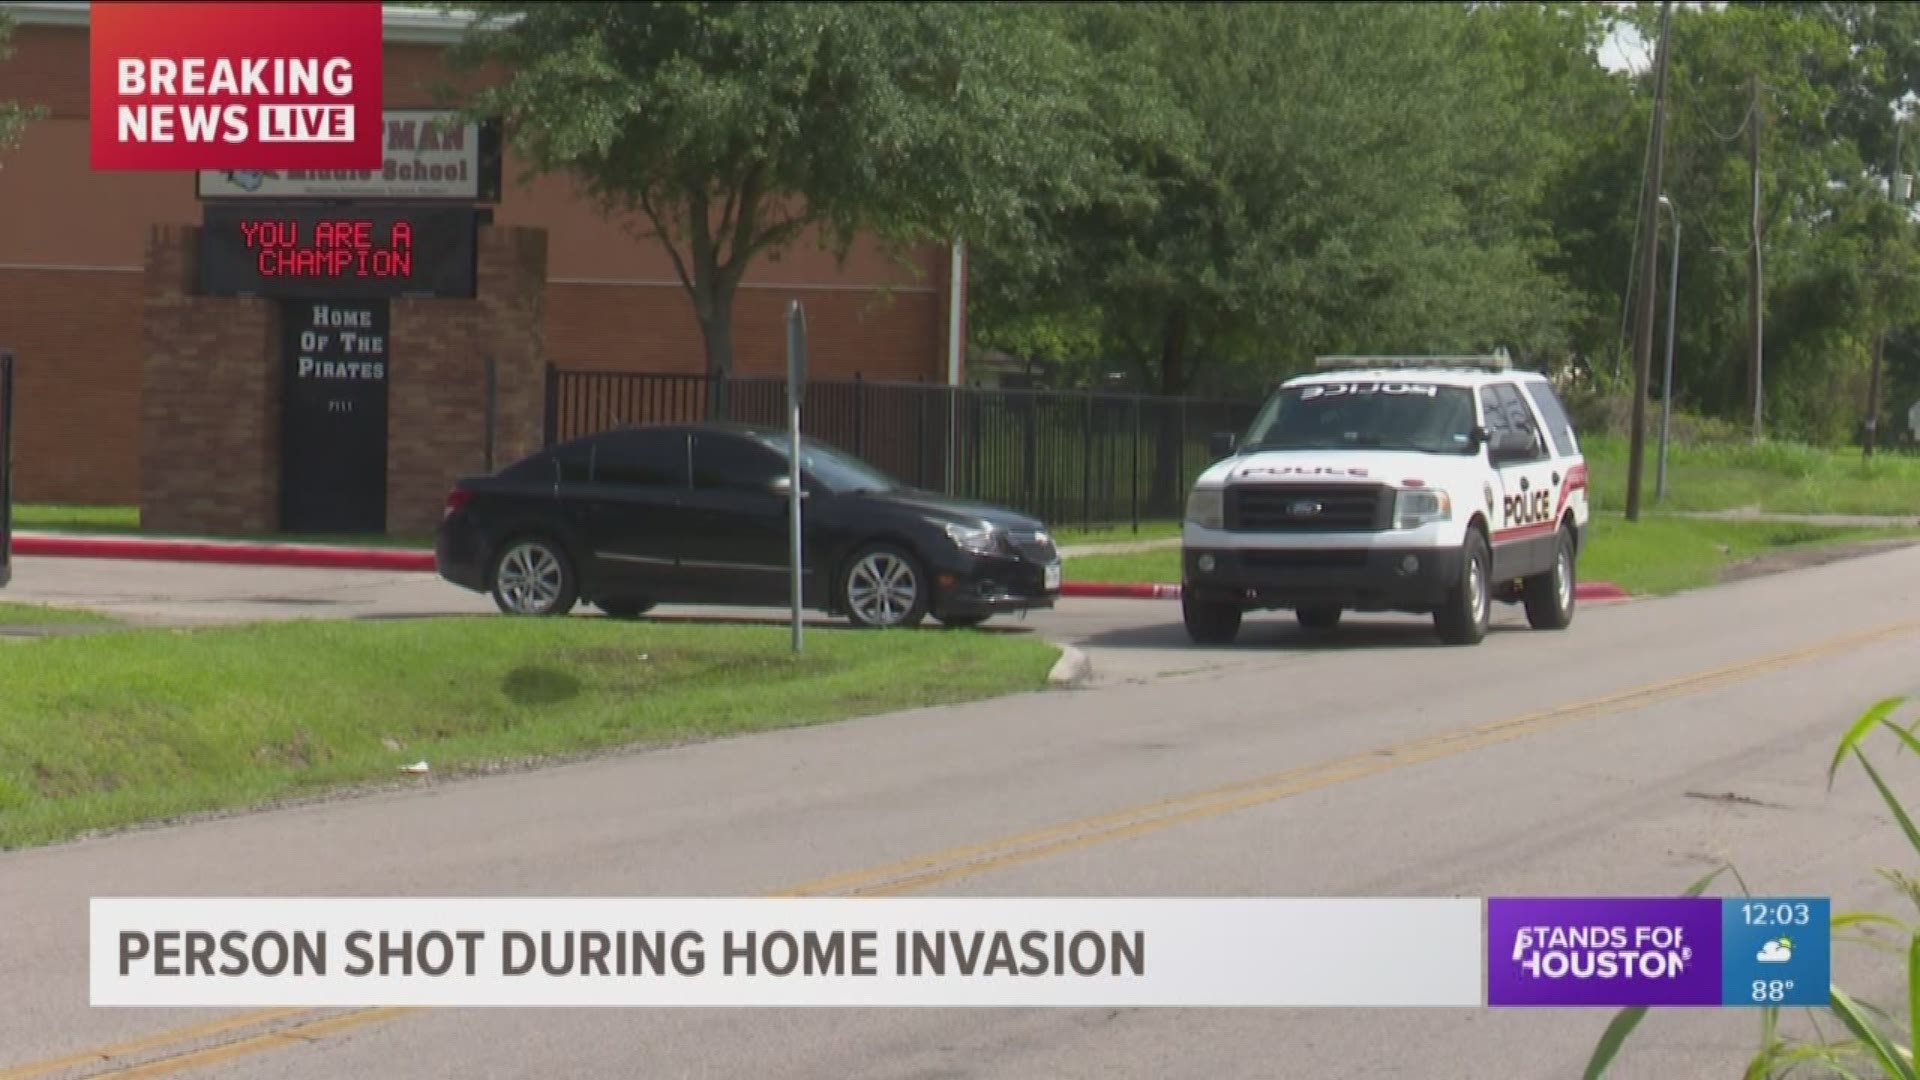 Police are investigating at shooting in southeast Houston they believe might have started as a home invasion at an apartment complex Wednesday morning.